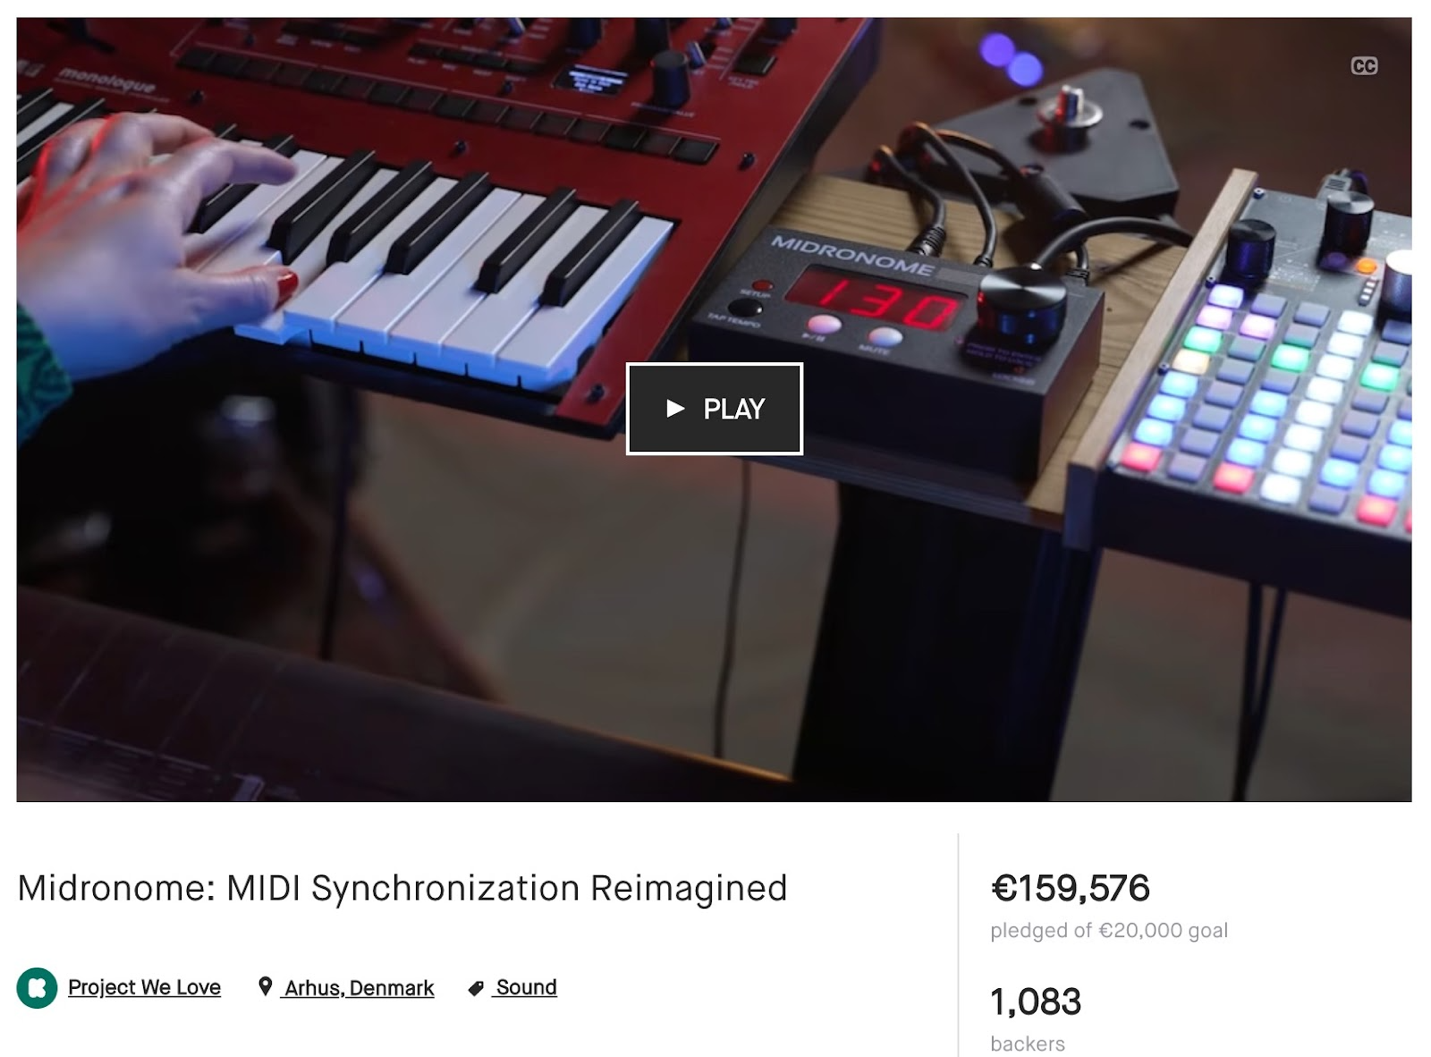 A picture of a hand playing a synth next to other DJ'ing tools. The bottom text reads "Midronome: MIDI Synchronization Reimagined"